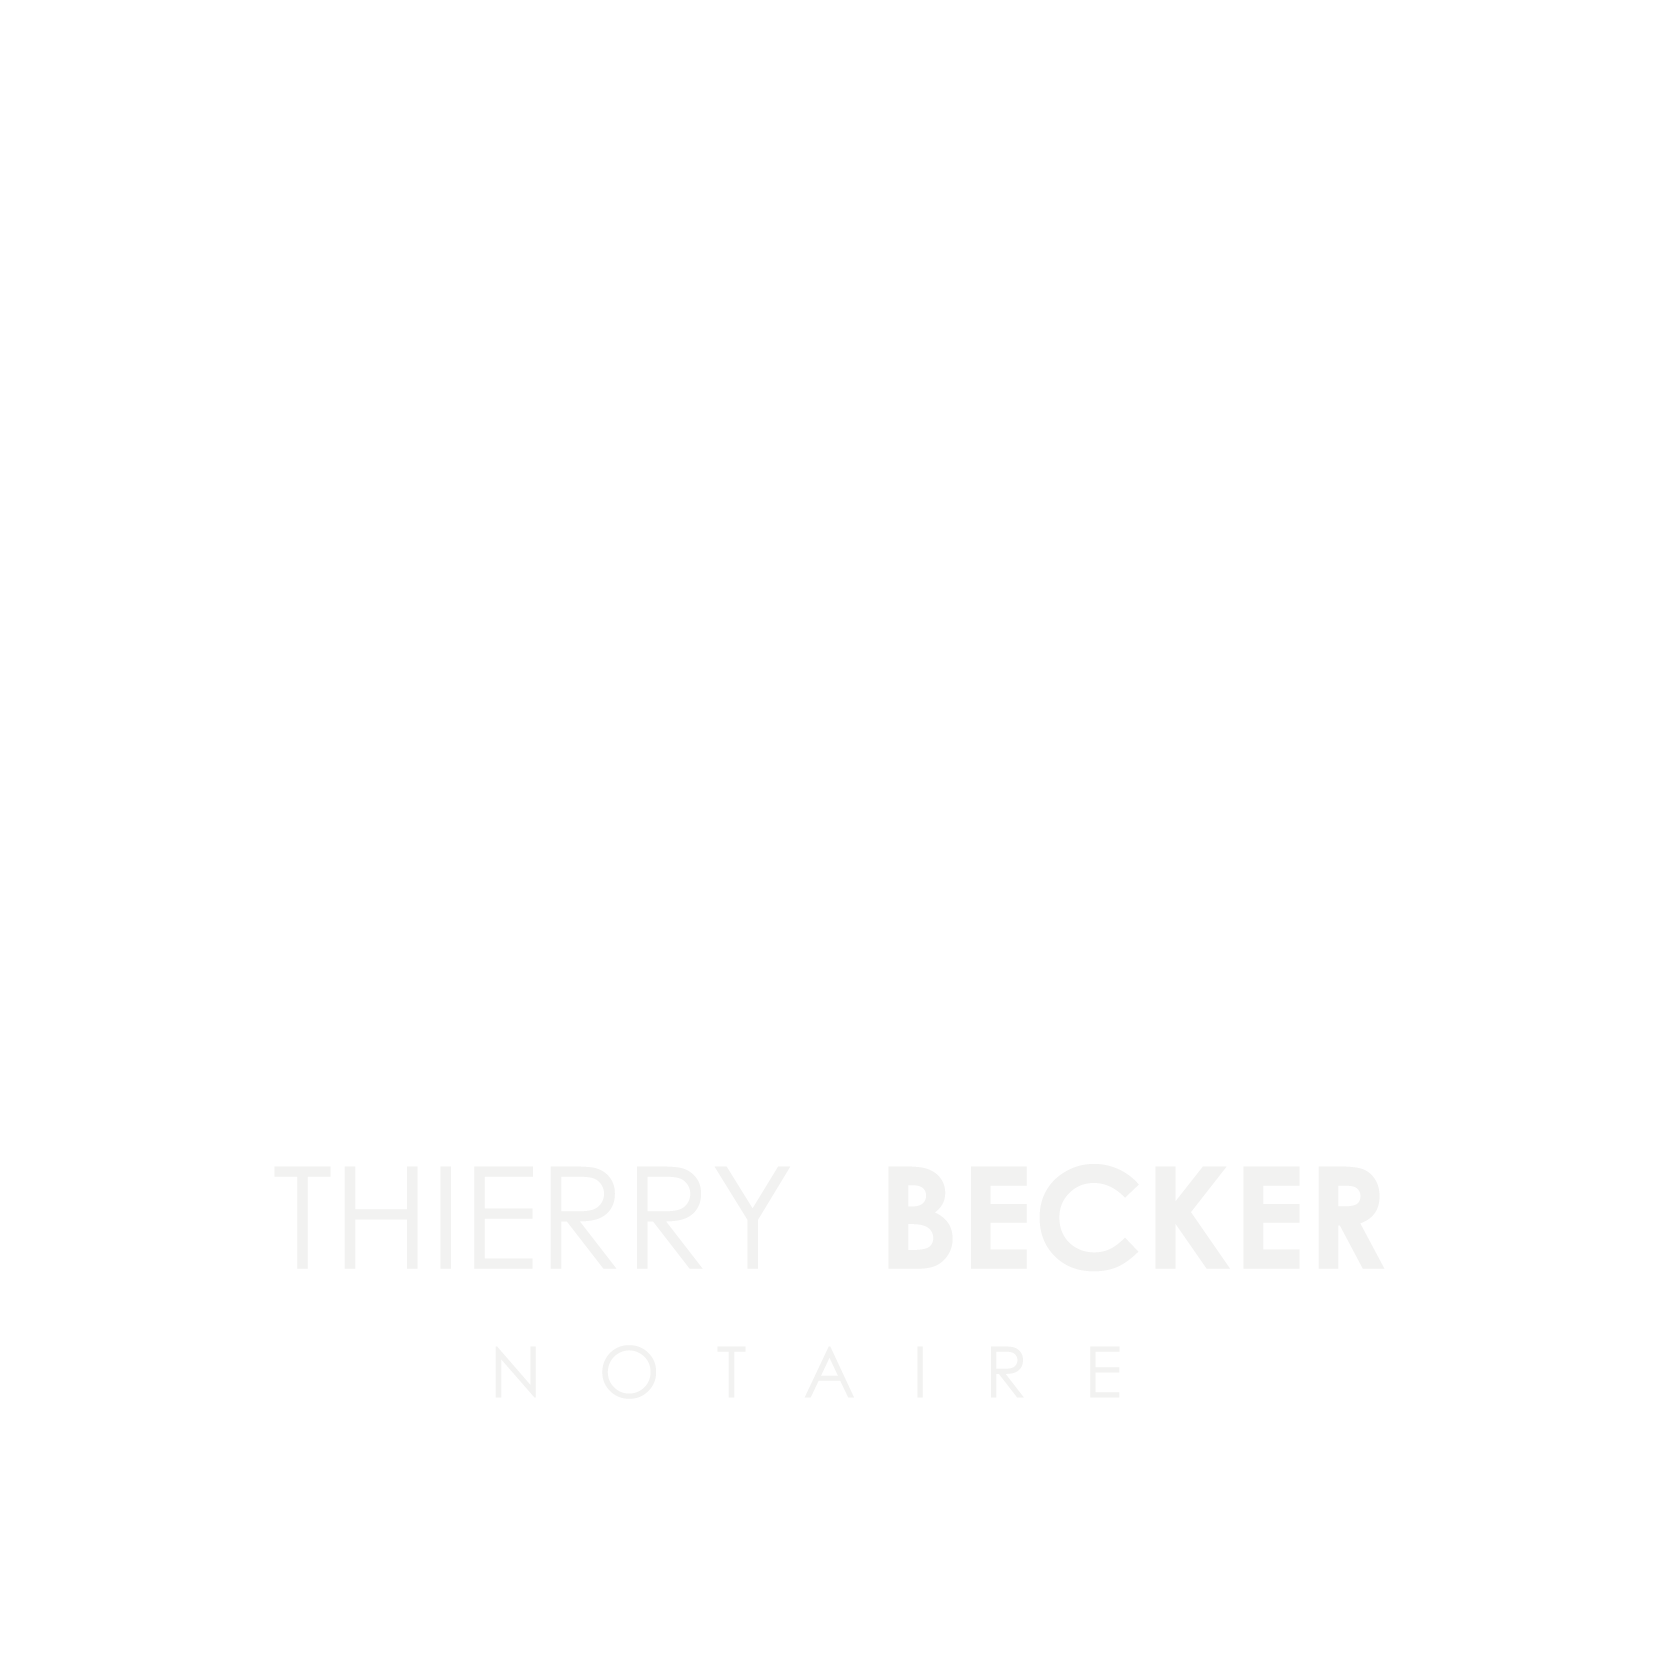 Notaire Thierry Becker